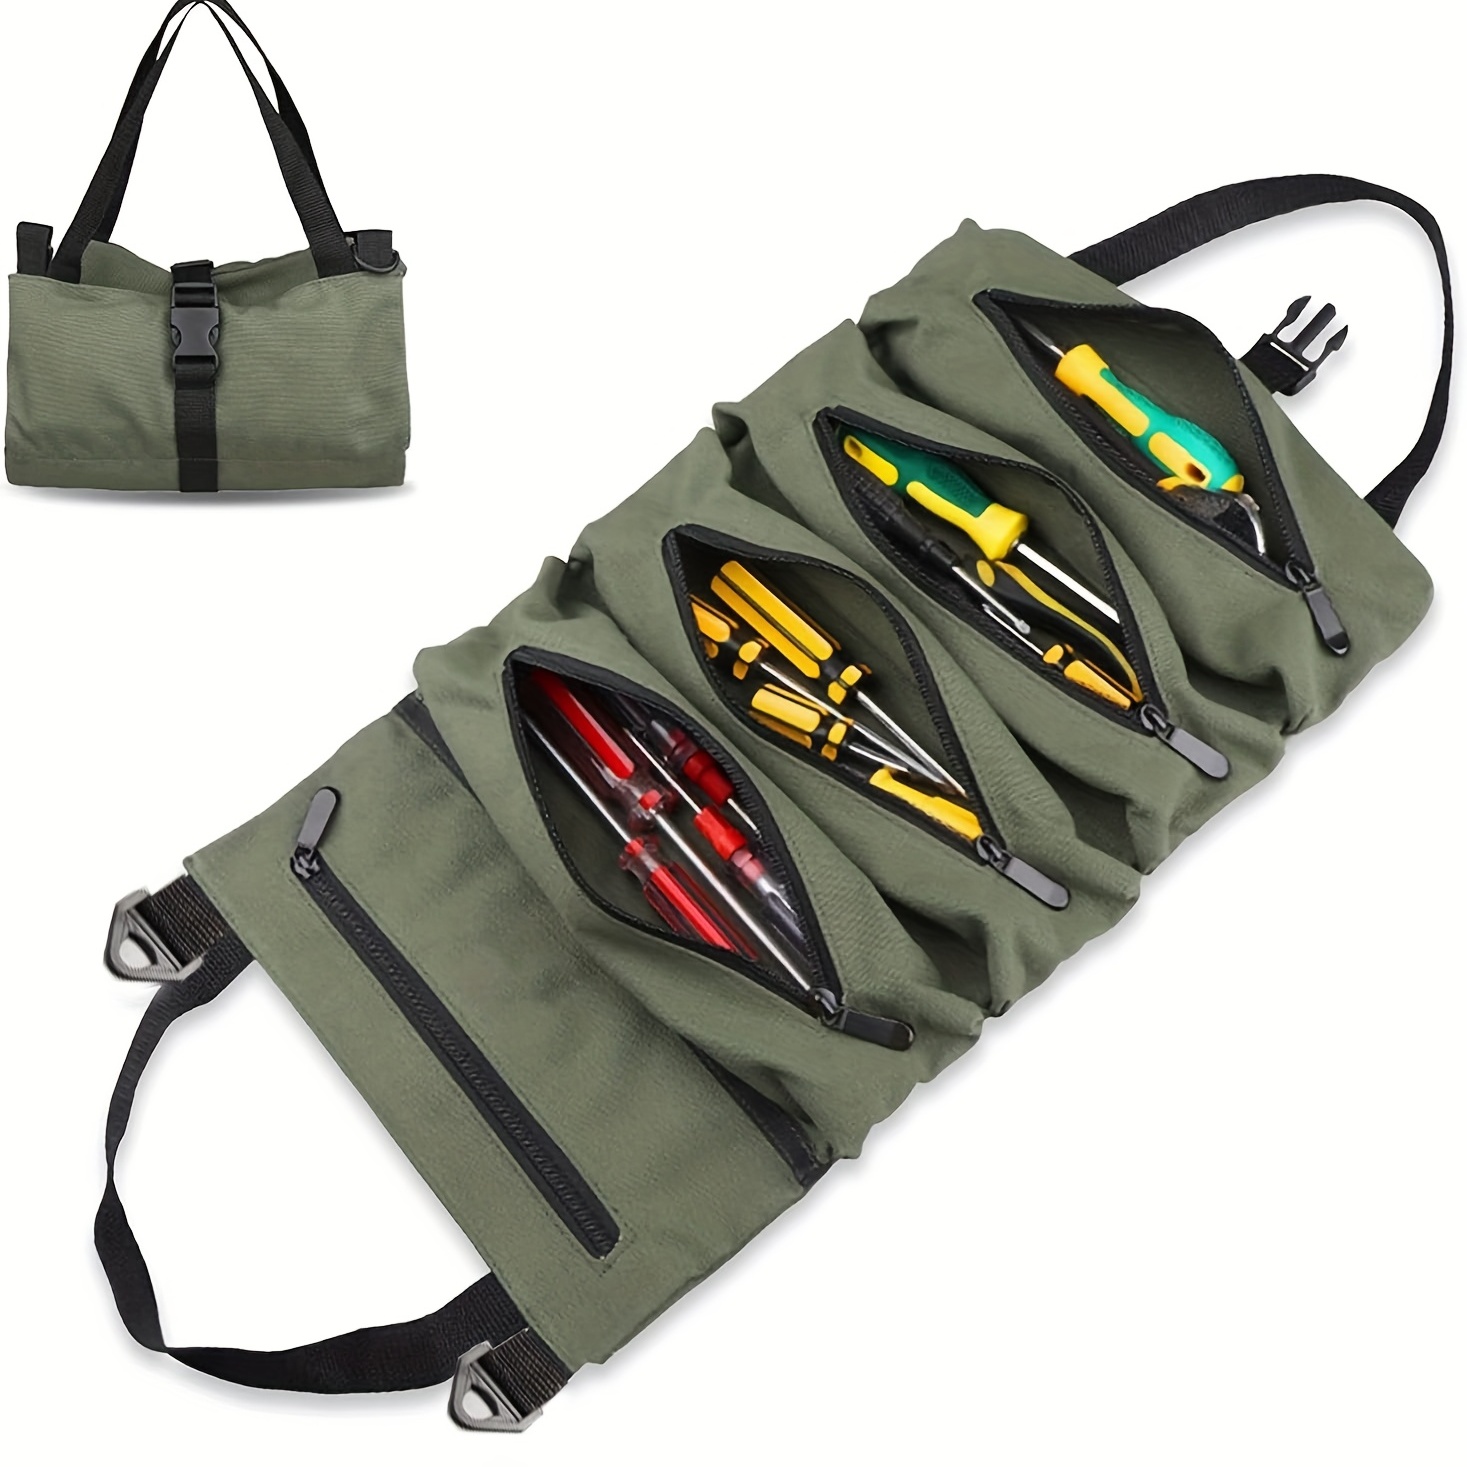 1pc Tool Roll Multi Purpose Roll Up Tool Bag Wrench Roll Car First Aid Kit  Wrap Roll Storage Case Hanging Tool Zipper Carrier Tote Car Camping Gear